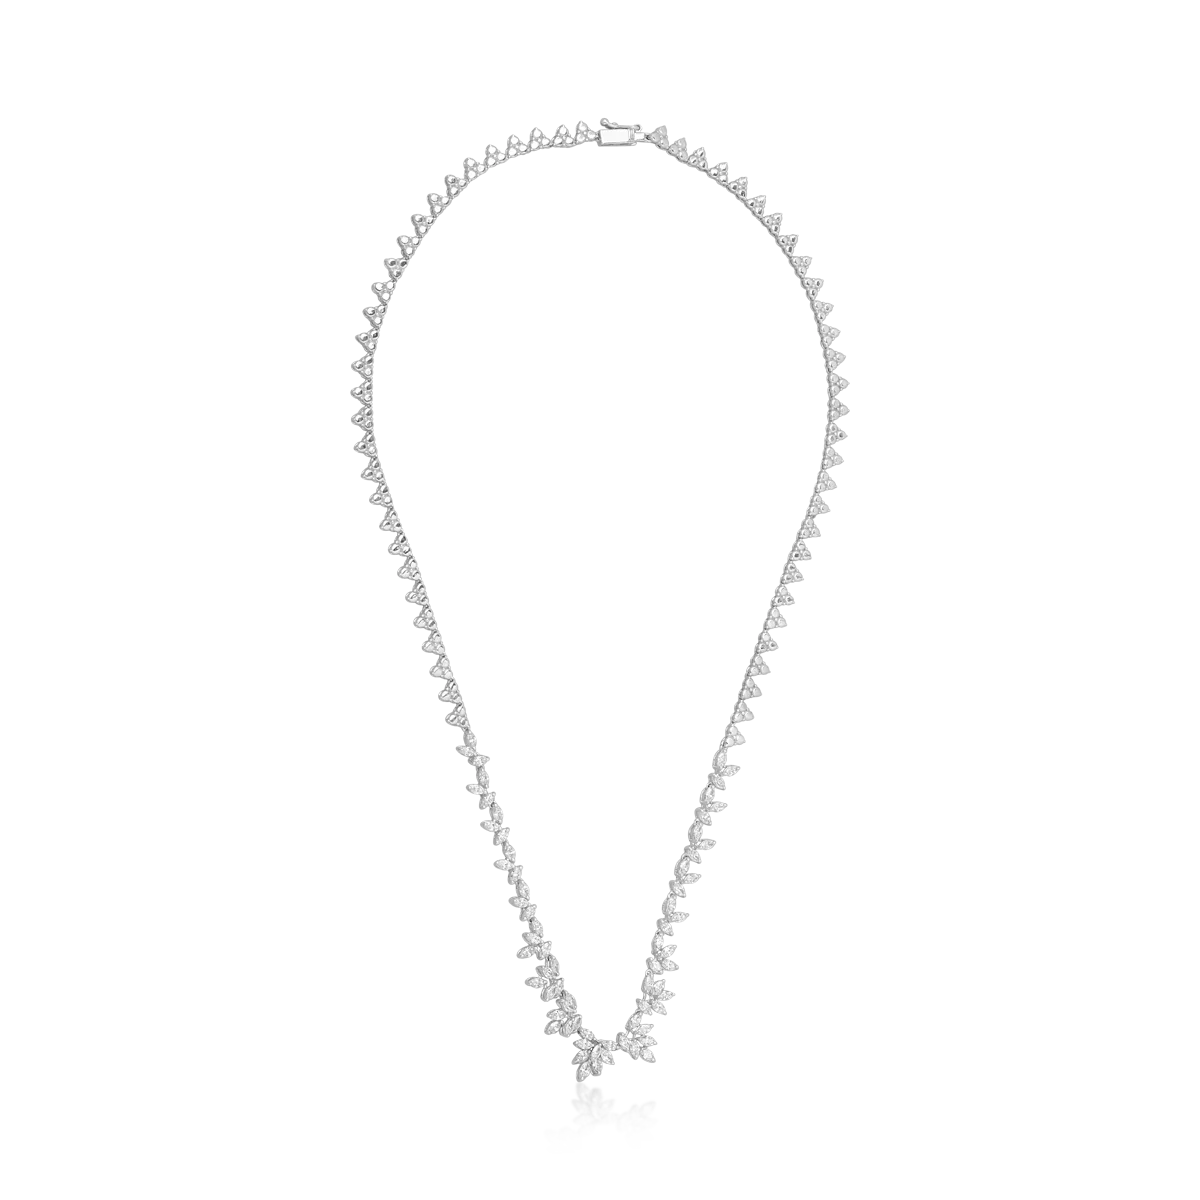 18K white gold necklace with diamonds of 3.41ct